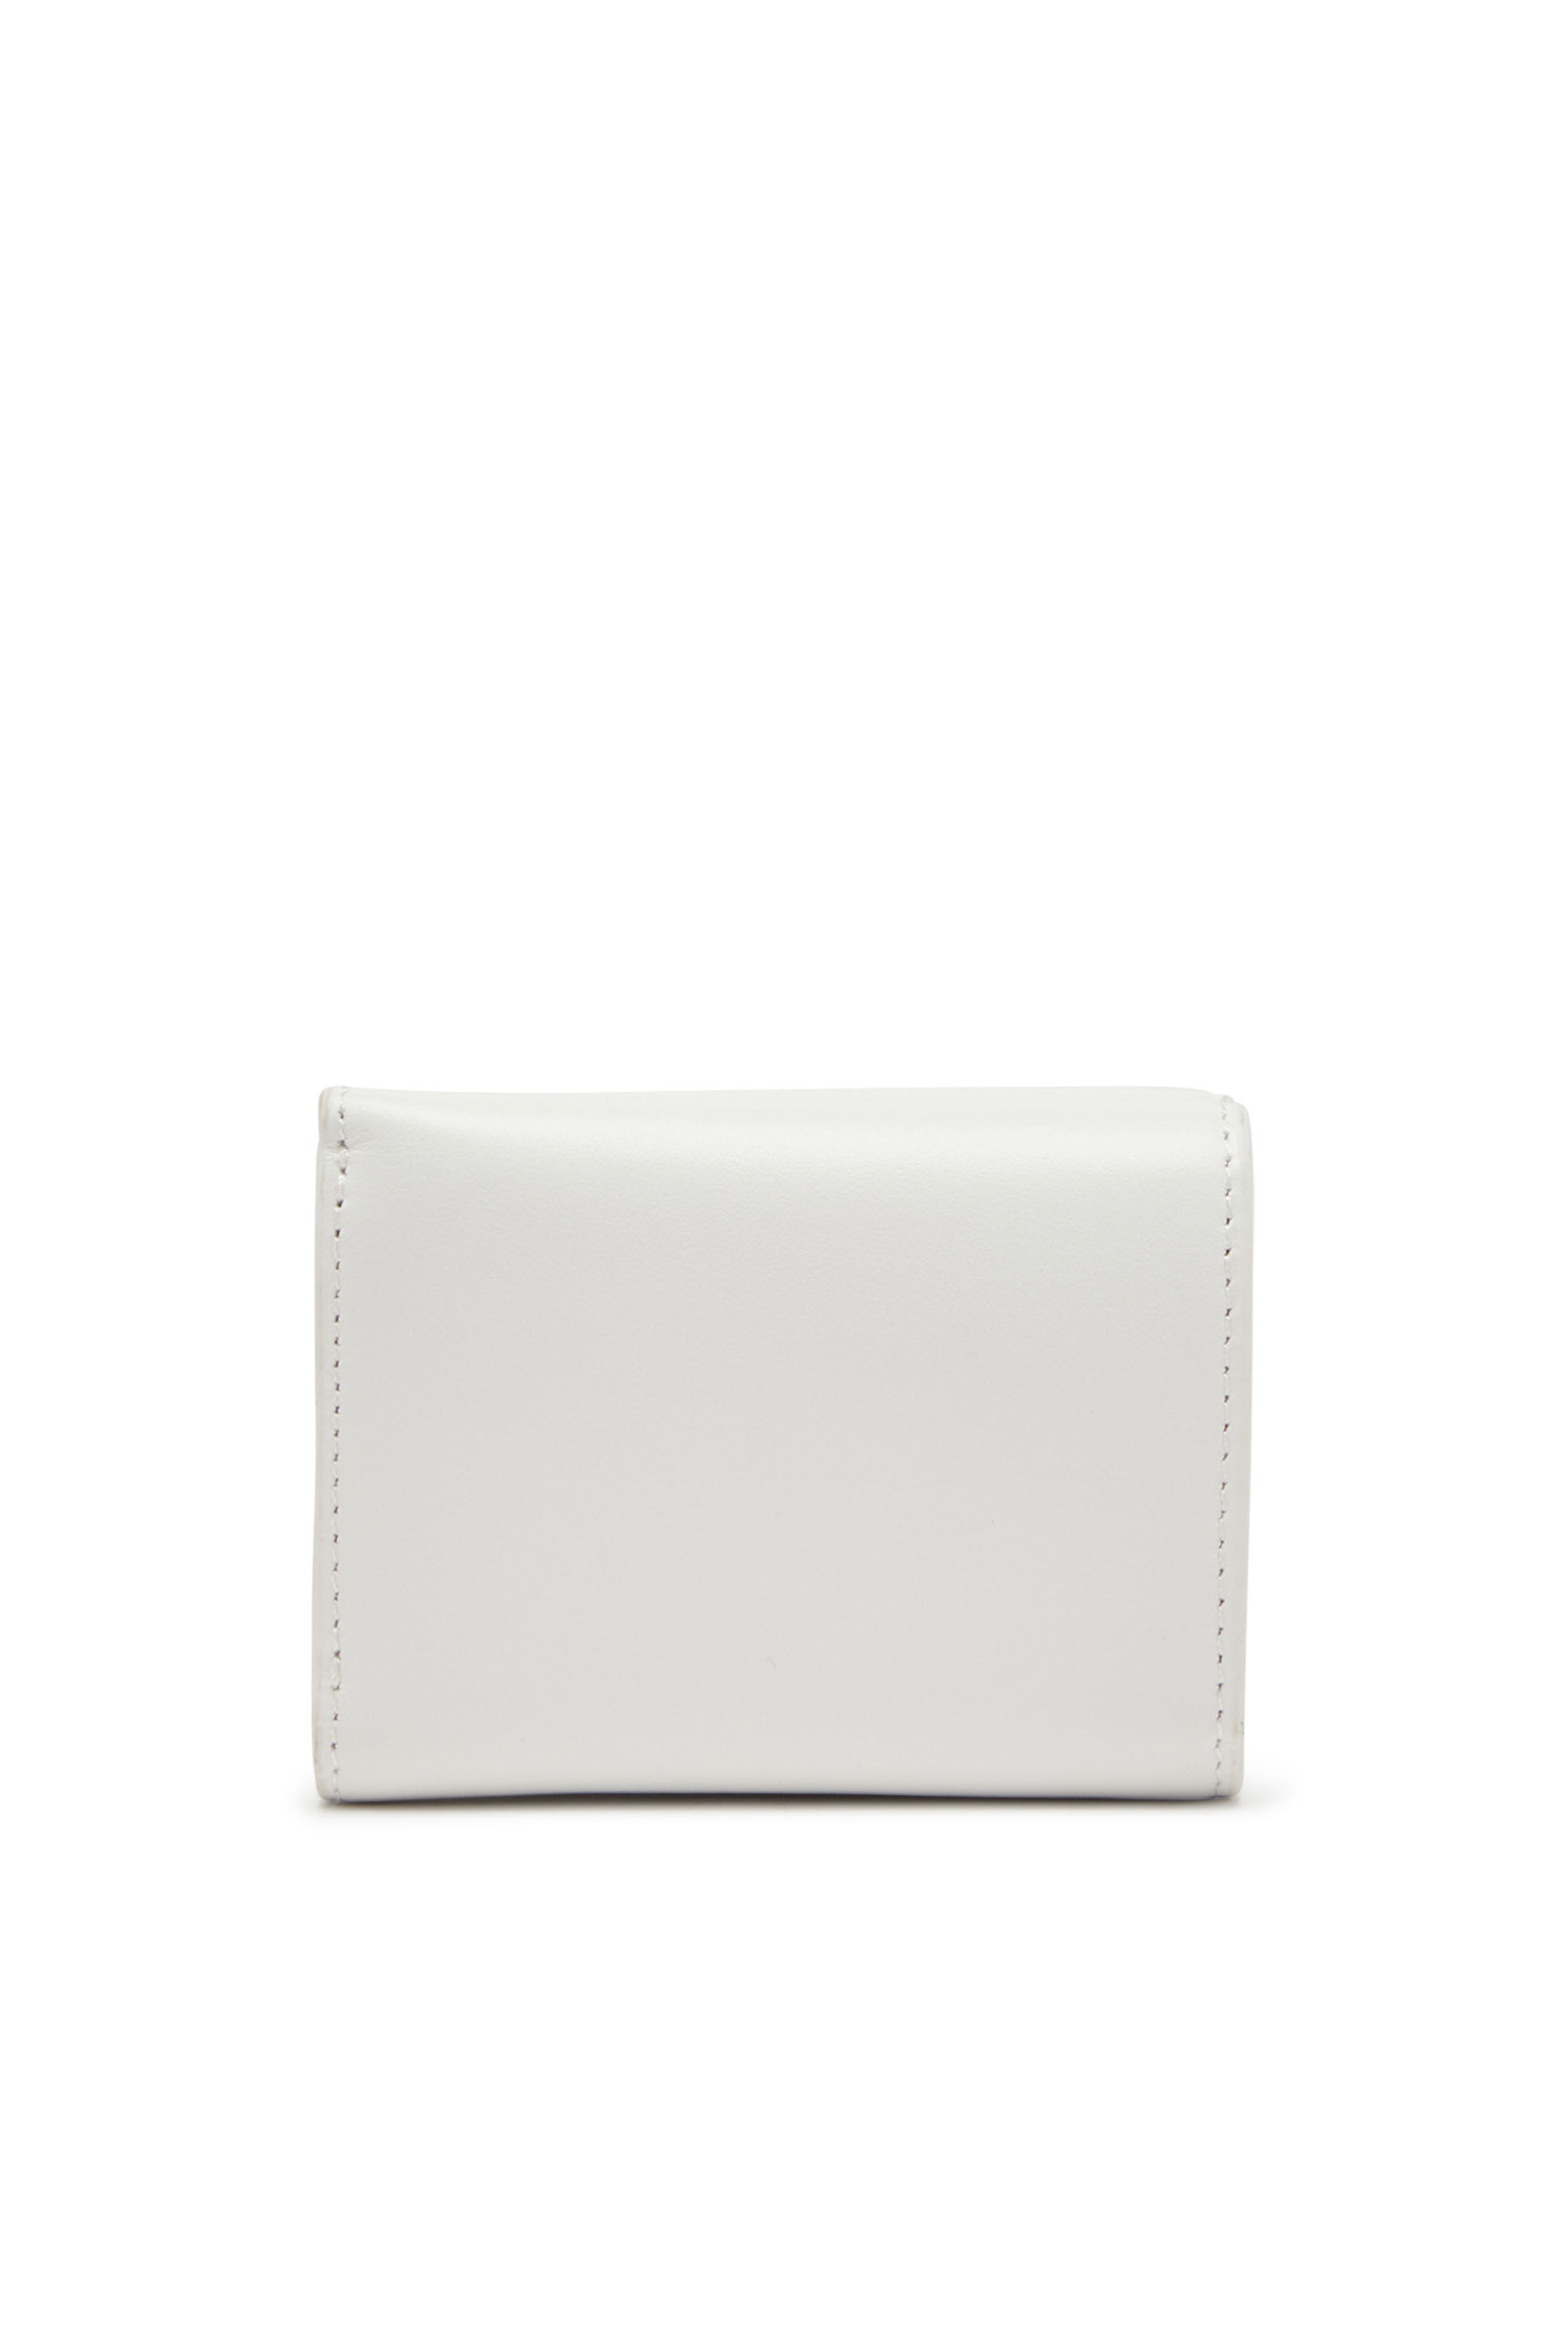 Diesel - 1DR TRI FOLD COIN XS II, Female Tri-fold wallet in leather in ホワイト - Image 2